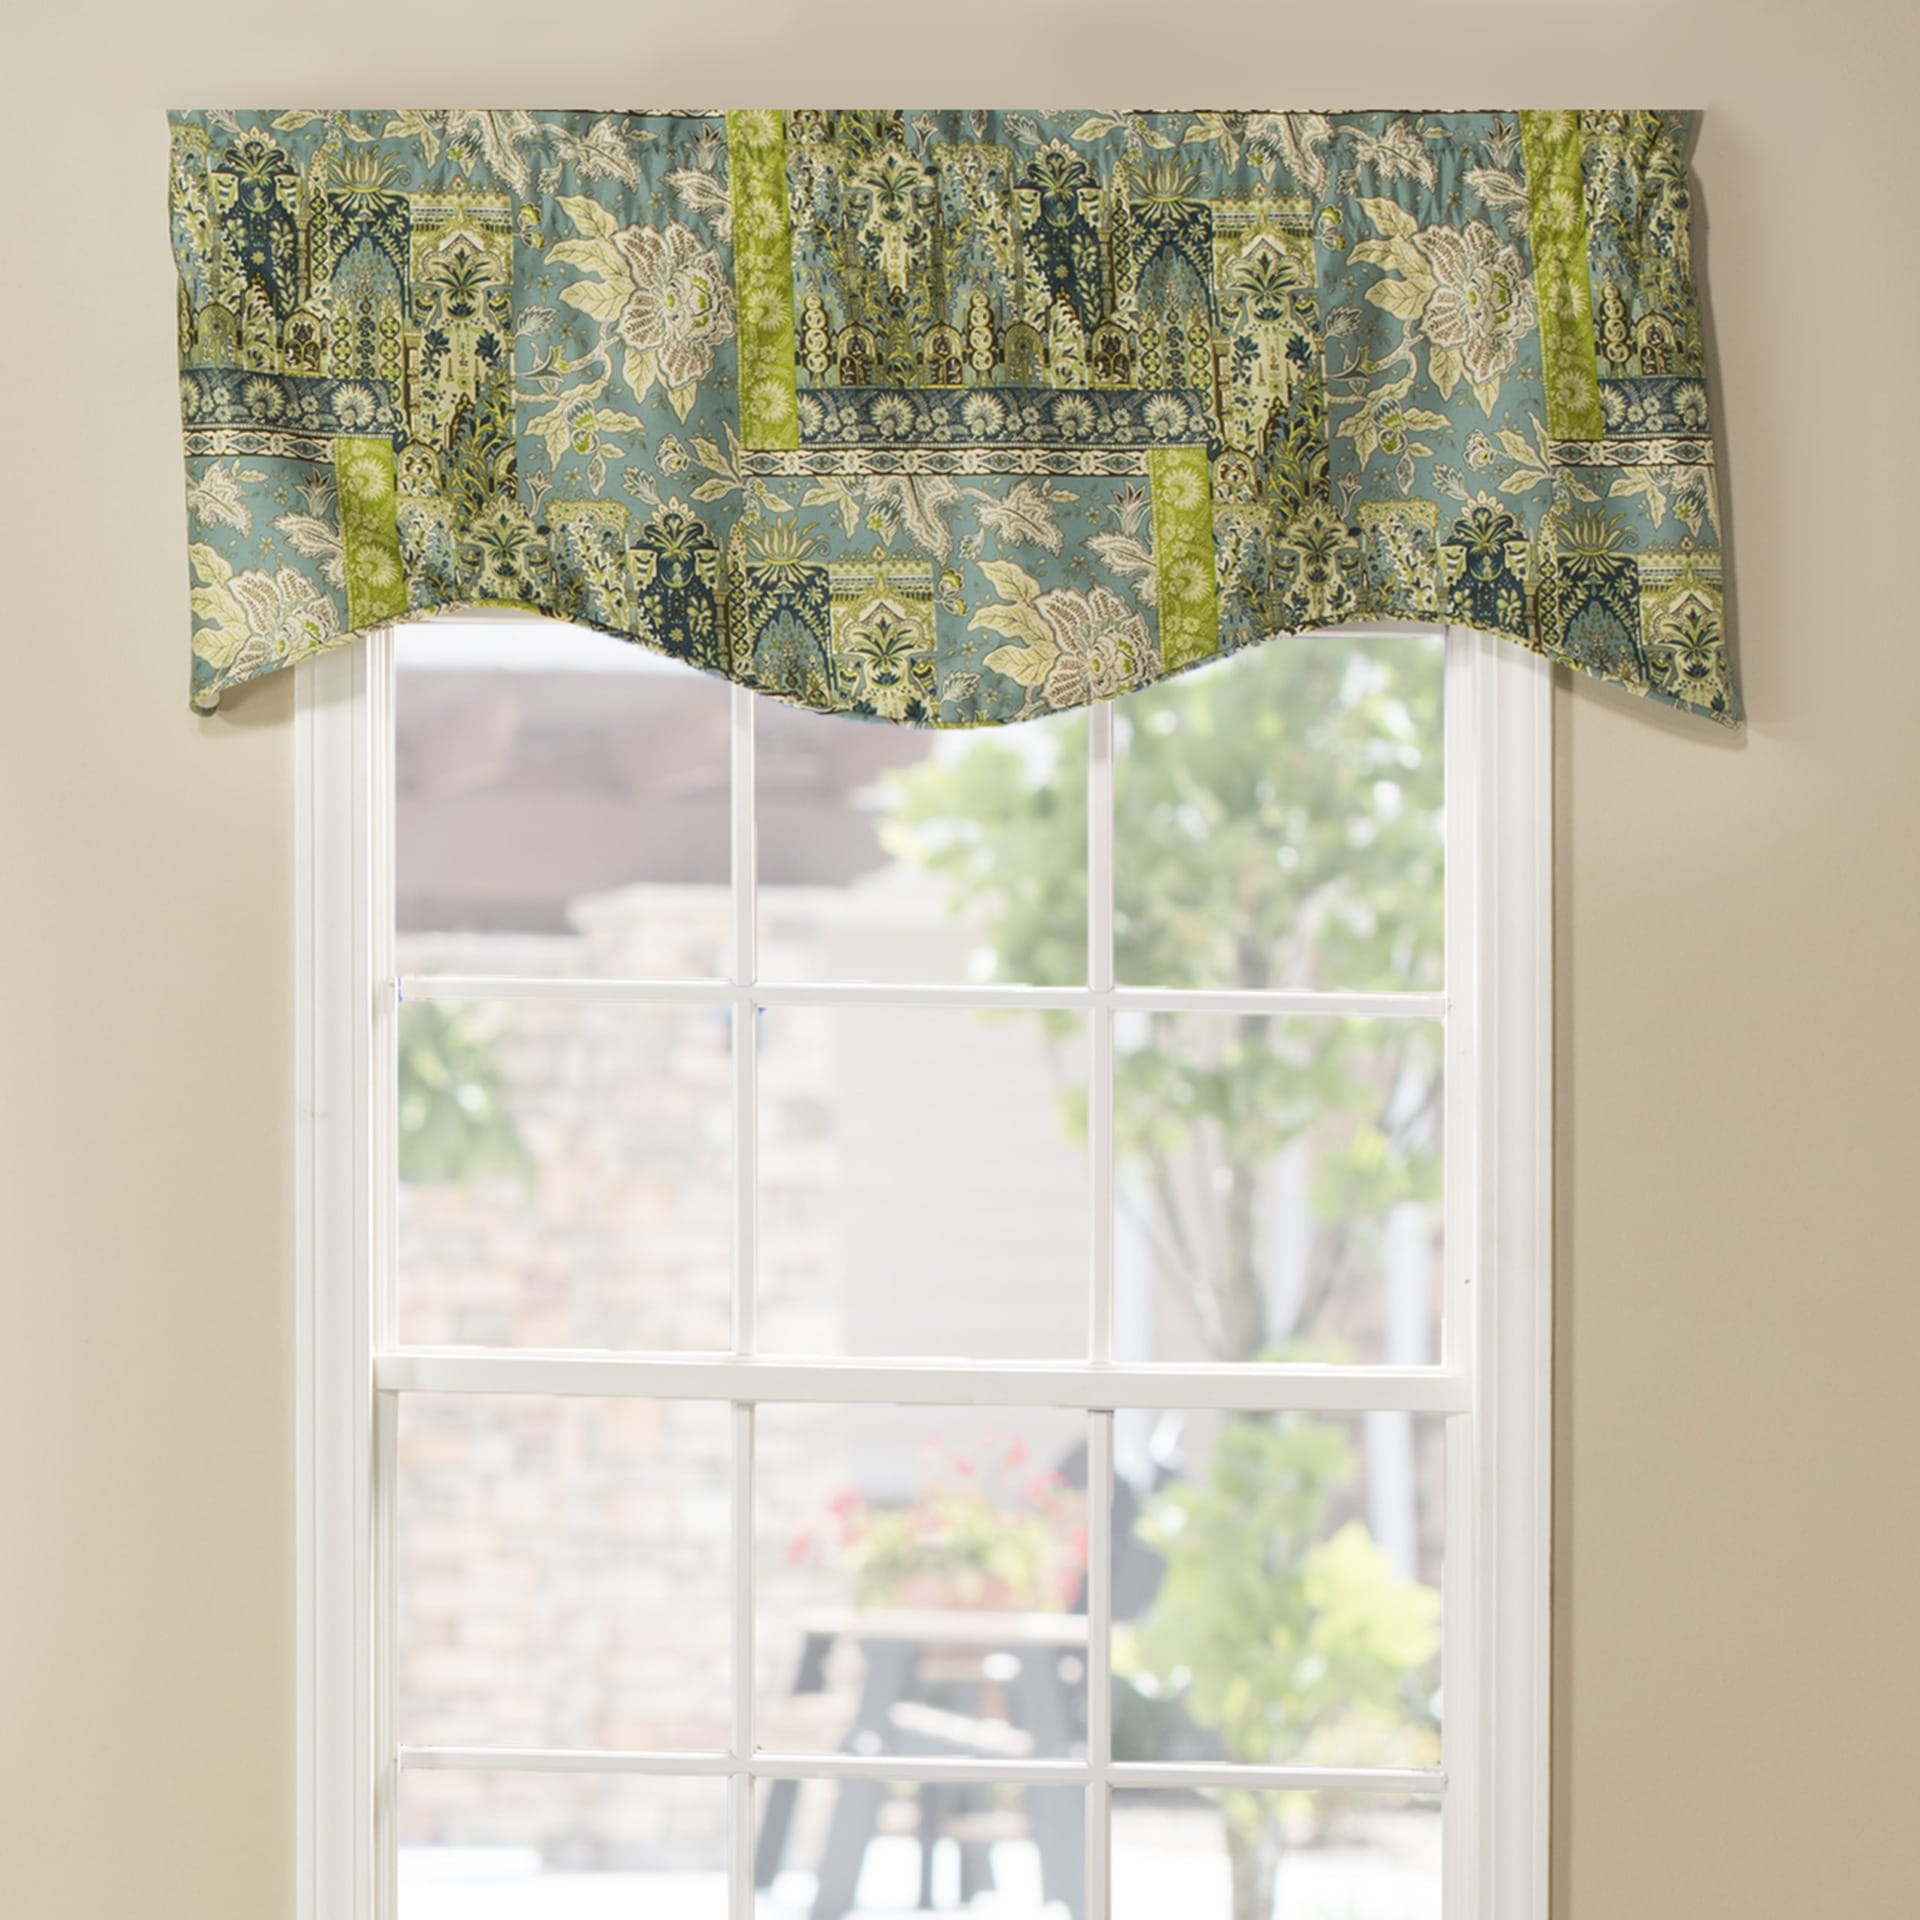 Tangier Tailored Filler Valance Thomasville at Home